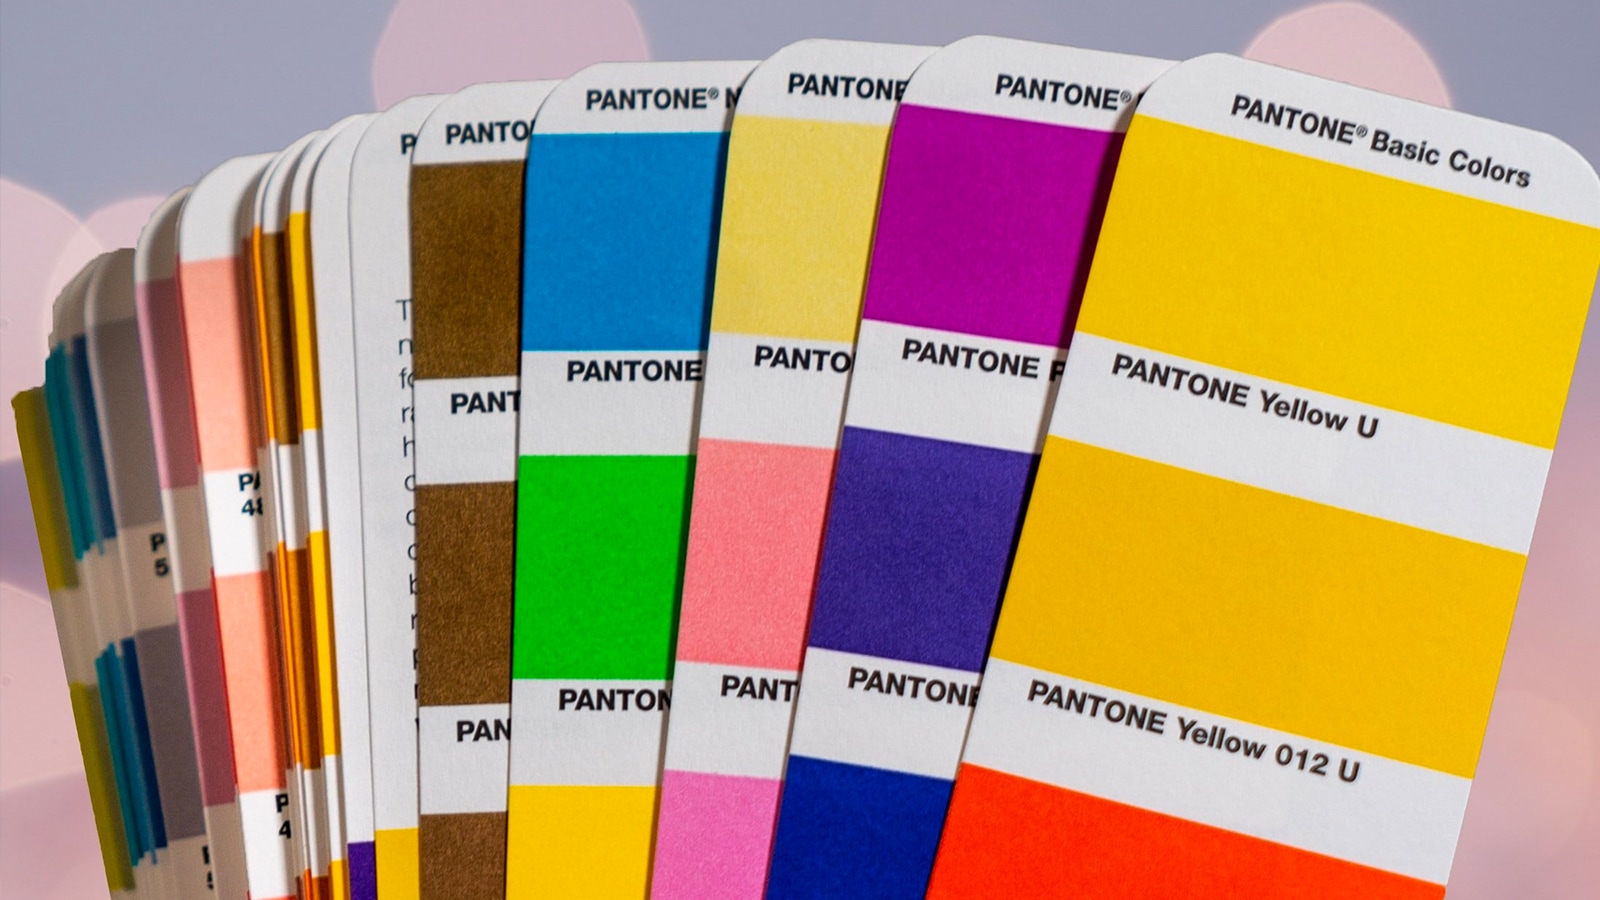 RGB, CMYK, Pantone, Hex code? What’s the difference?